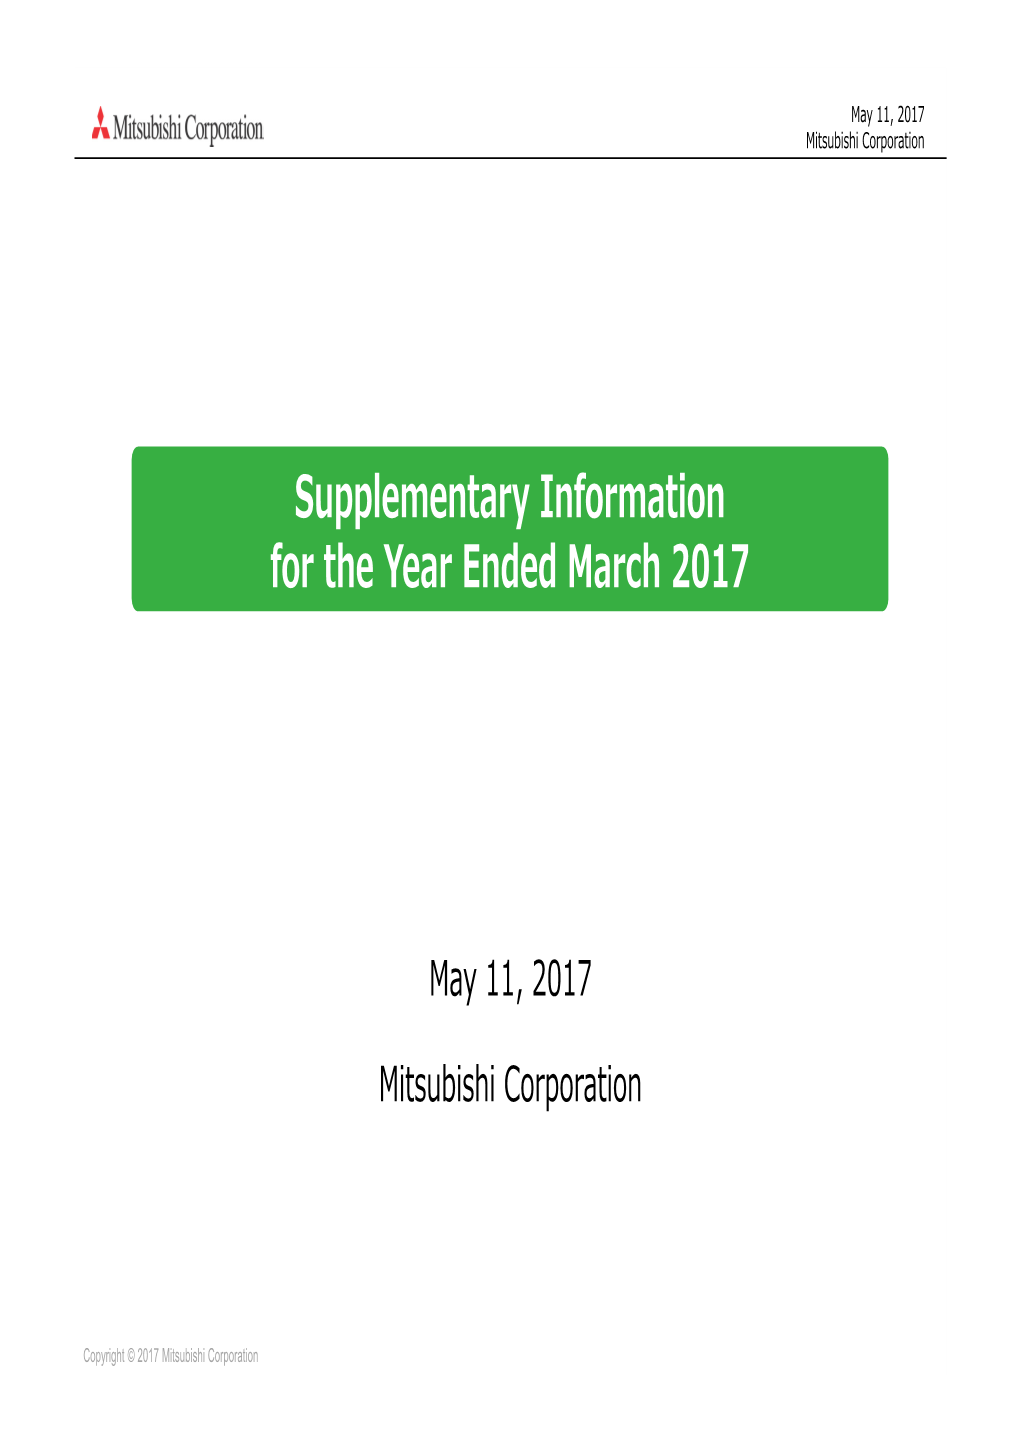 Supplementary Information to Fiscal Year Ended March 2017 (PDF:2.3MB)